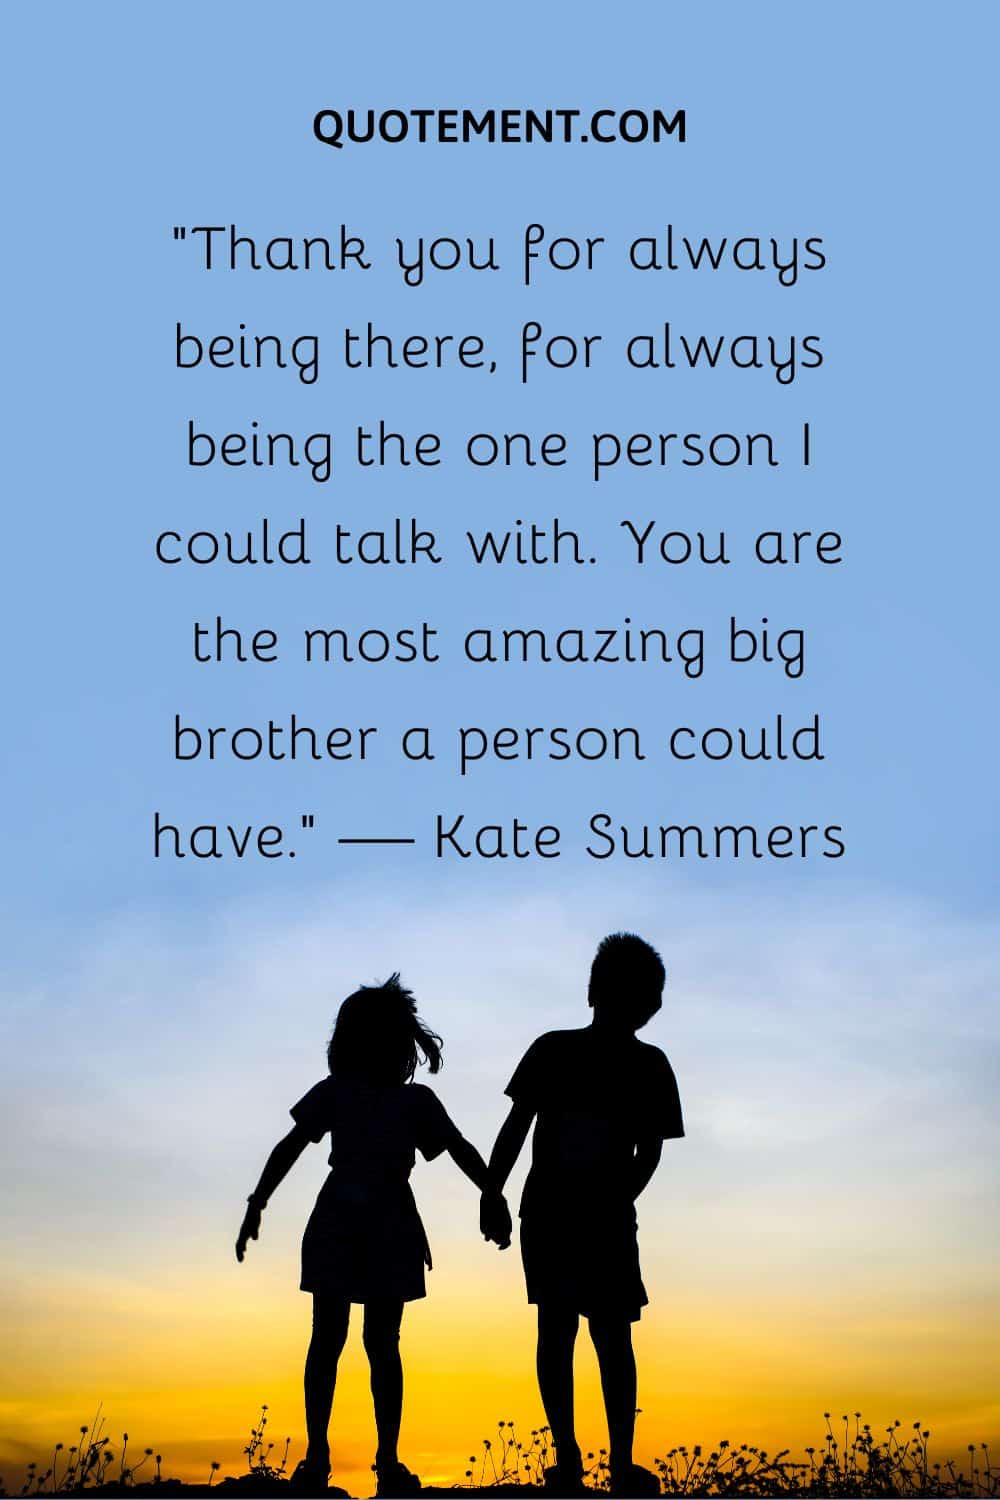 “Thank you for always being there, for always being the one person I could talk with. You are the most amazing big brother a person could have.” — Kate Summers